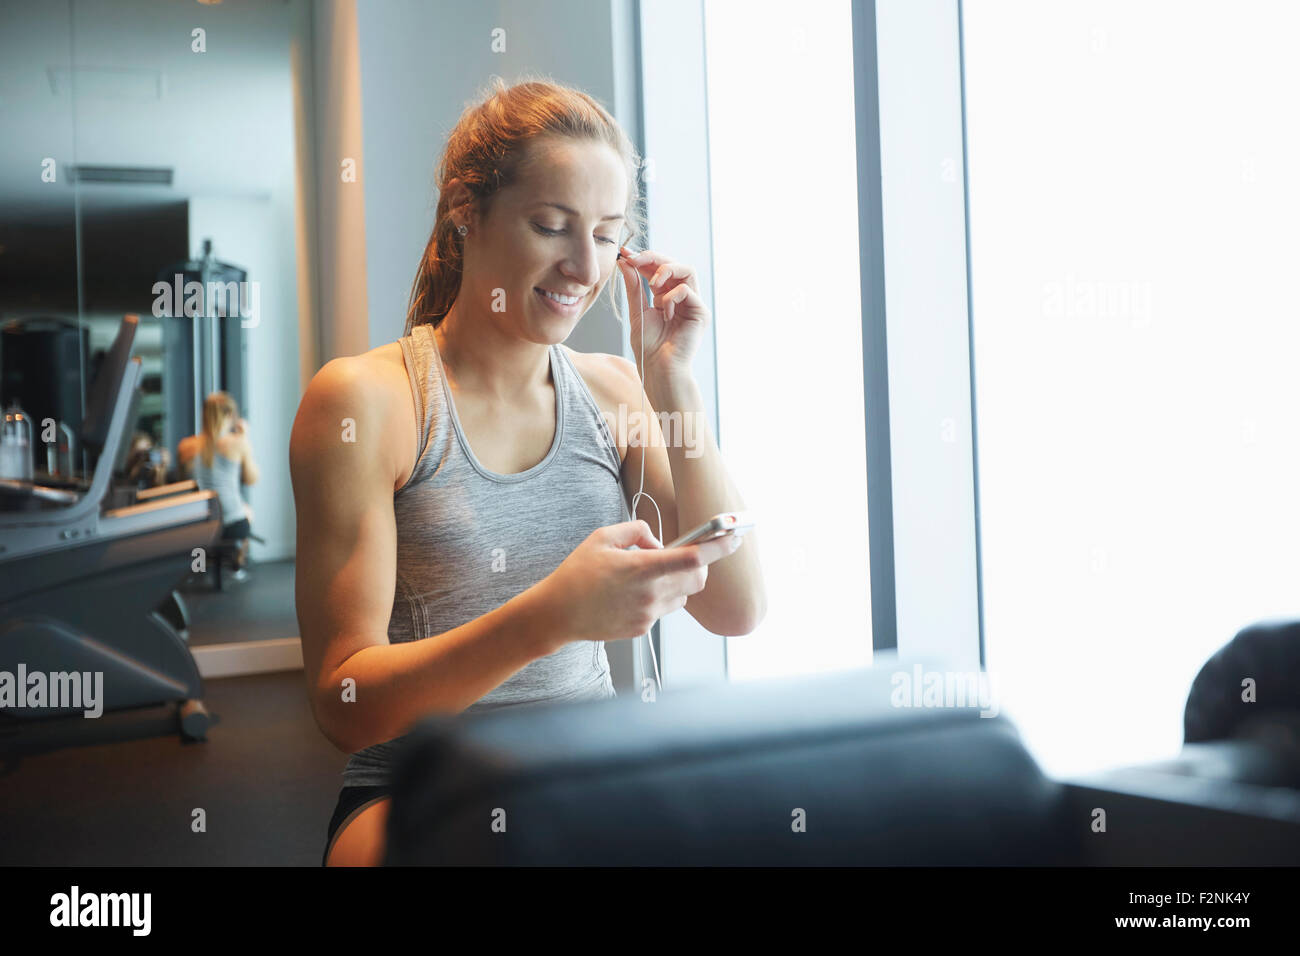 Woman listening to mp3 player in gym Stock Photo